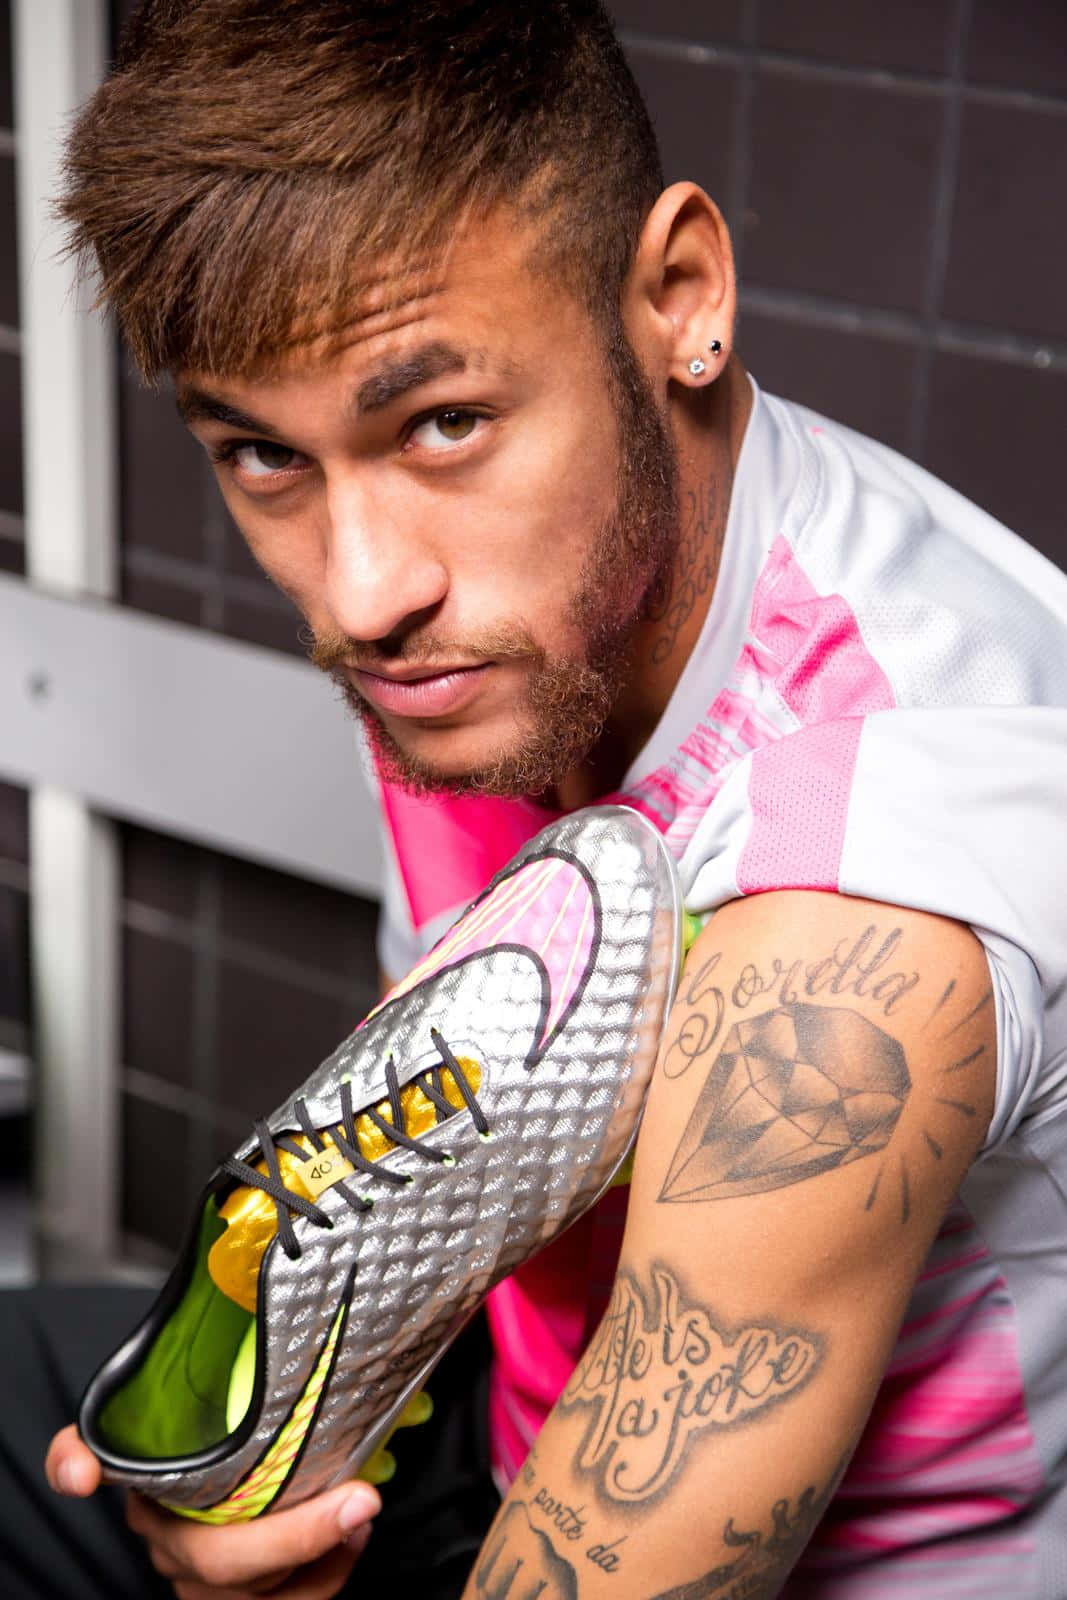 A Man With Tattoos Holding A Soccer Shoe